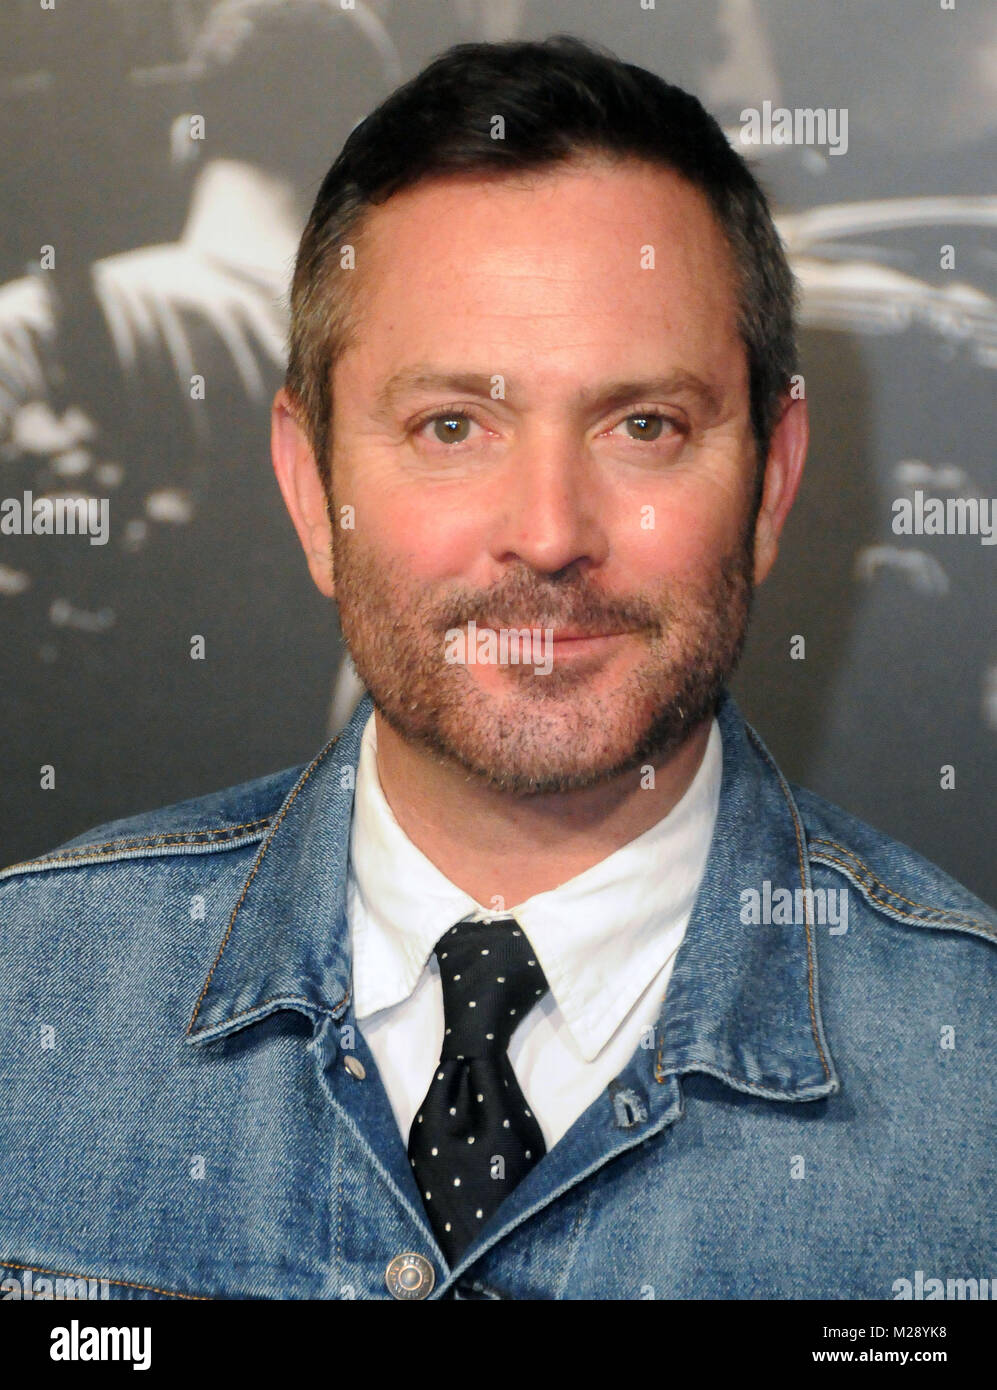 BURBANK, CA - FEBRUARY 5: Actor Thomas Lennon attends the World Premiere of 'The 15:17 To Paris' at Warner Bros. Studios, SJR Theater on February 5, 2018 in Burbank, California. Photo by Barry King/Alamy Live News Stock Photo